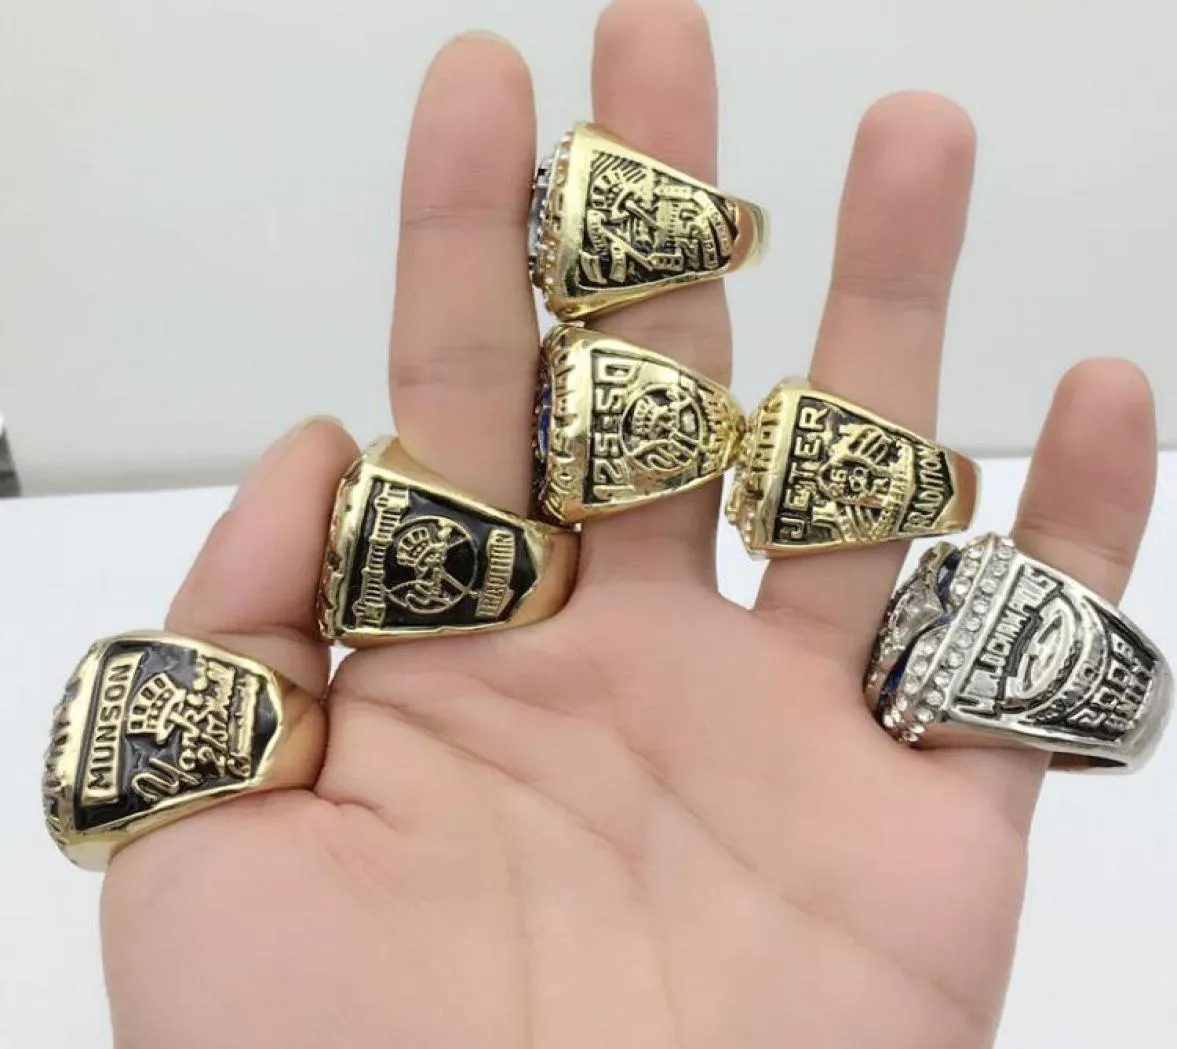 Fans039Collection of Souvenirs New York 2009 Yankees Championship Ring TideHoliday Gifts for Friends9436797